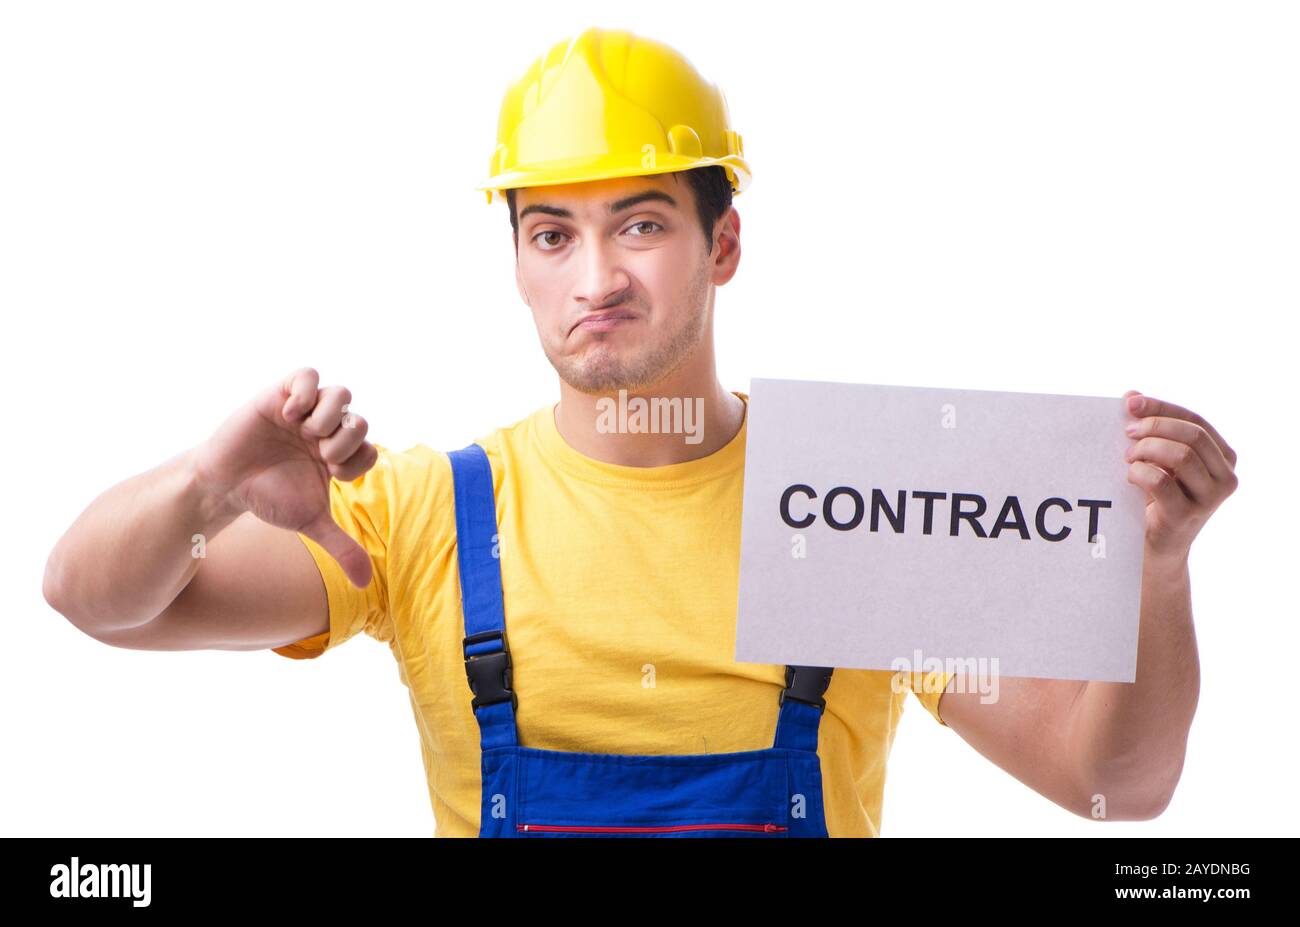 Worker not happy with his employment contract Stock Photo